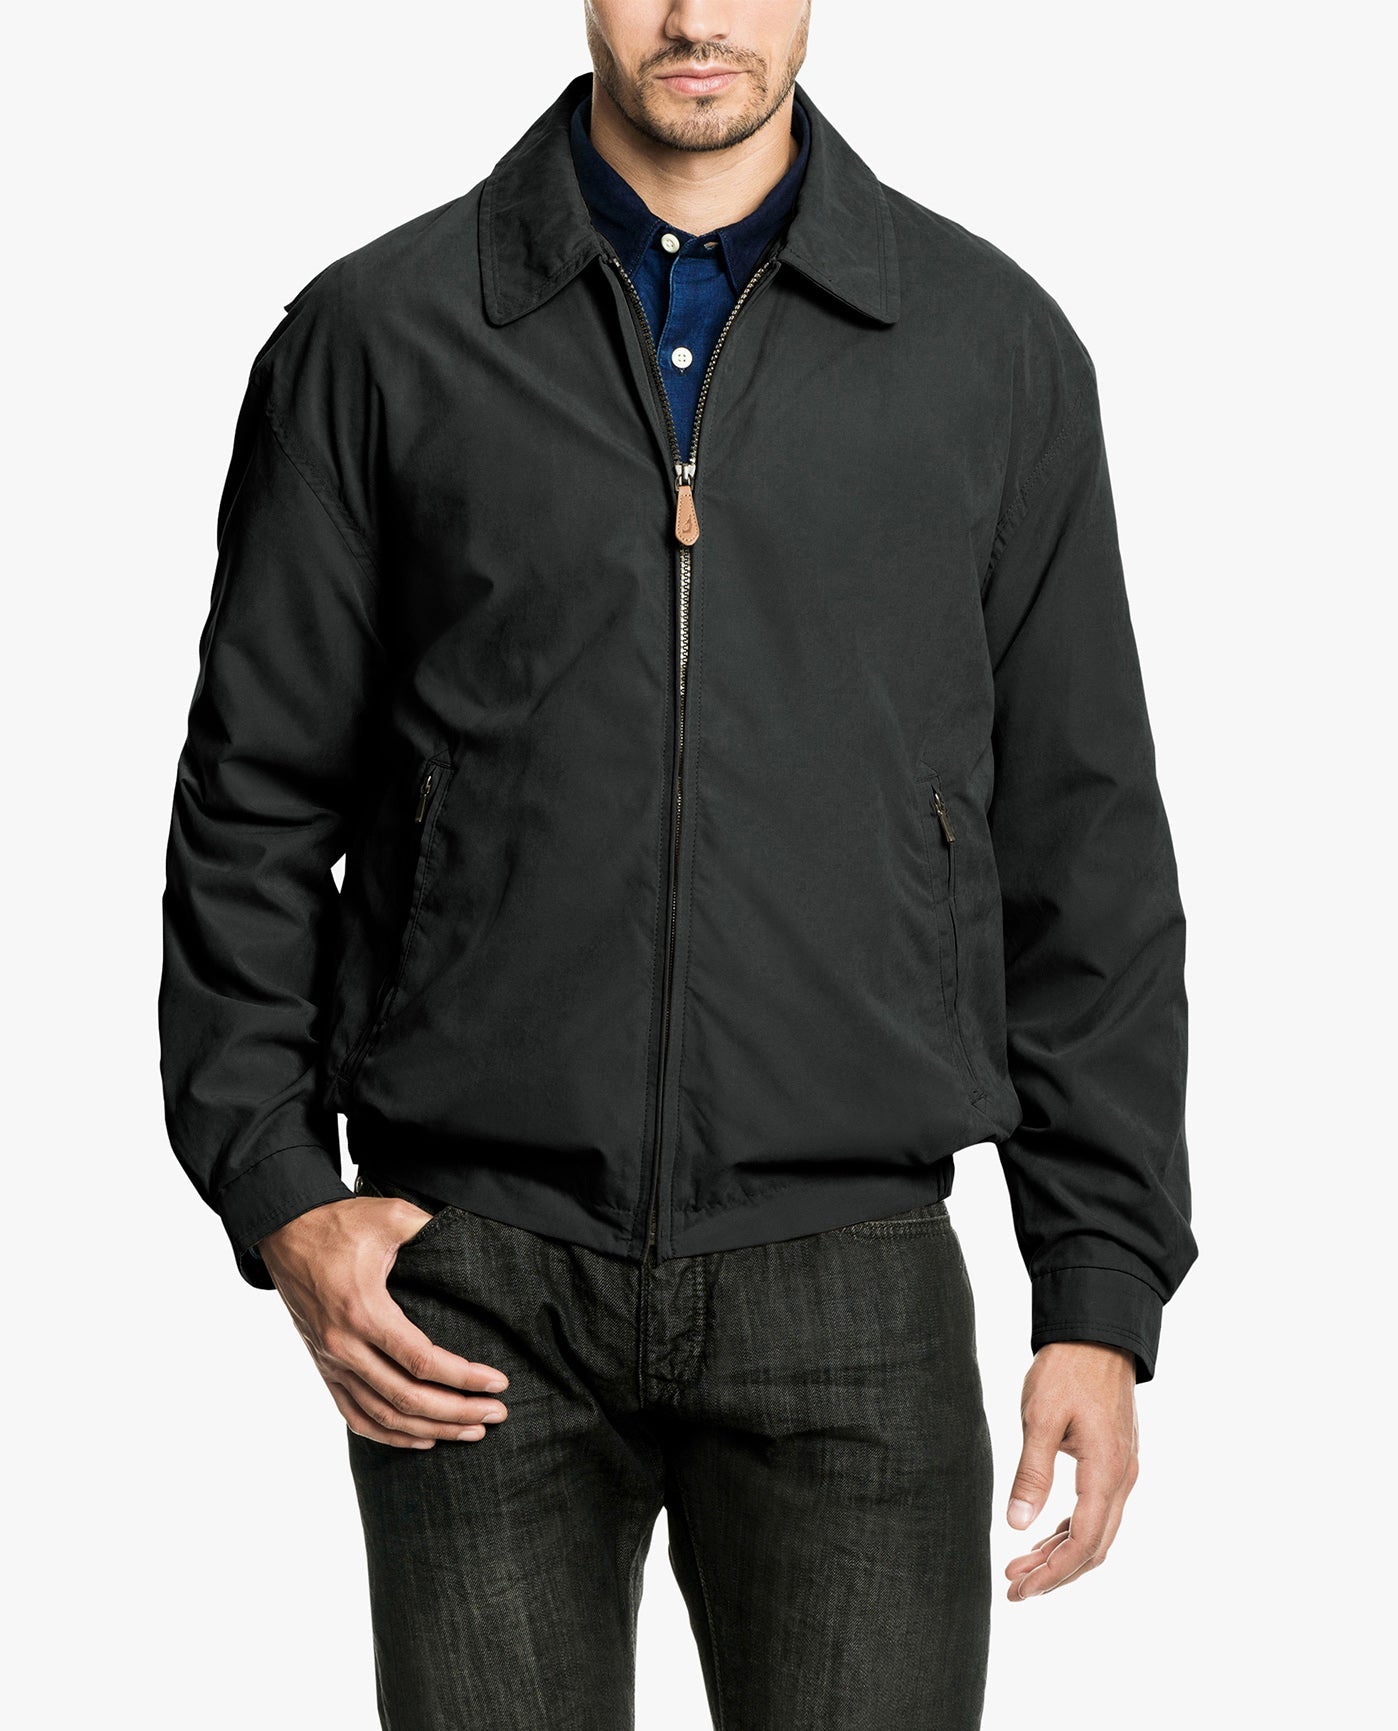 FRONT VIEW OF TALL LIGHT WEIGHT ZIP FRONT GOLF JACKET | IRON